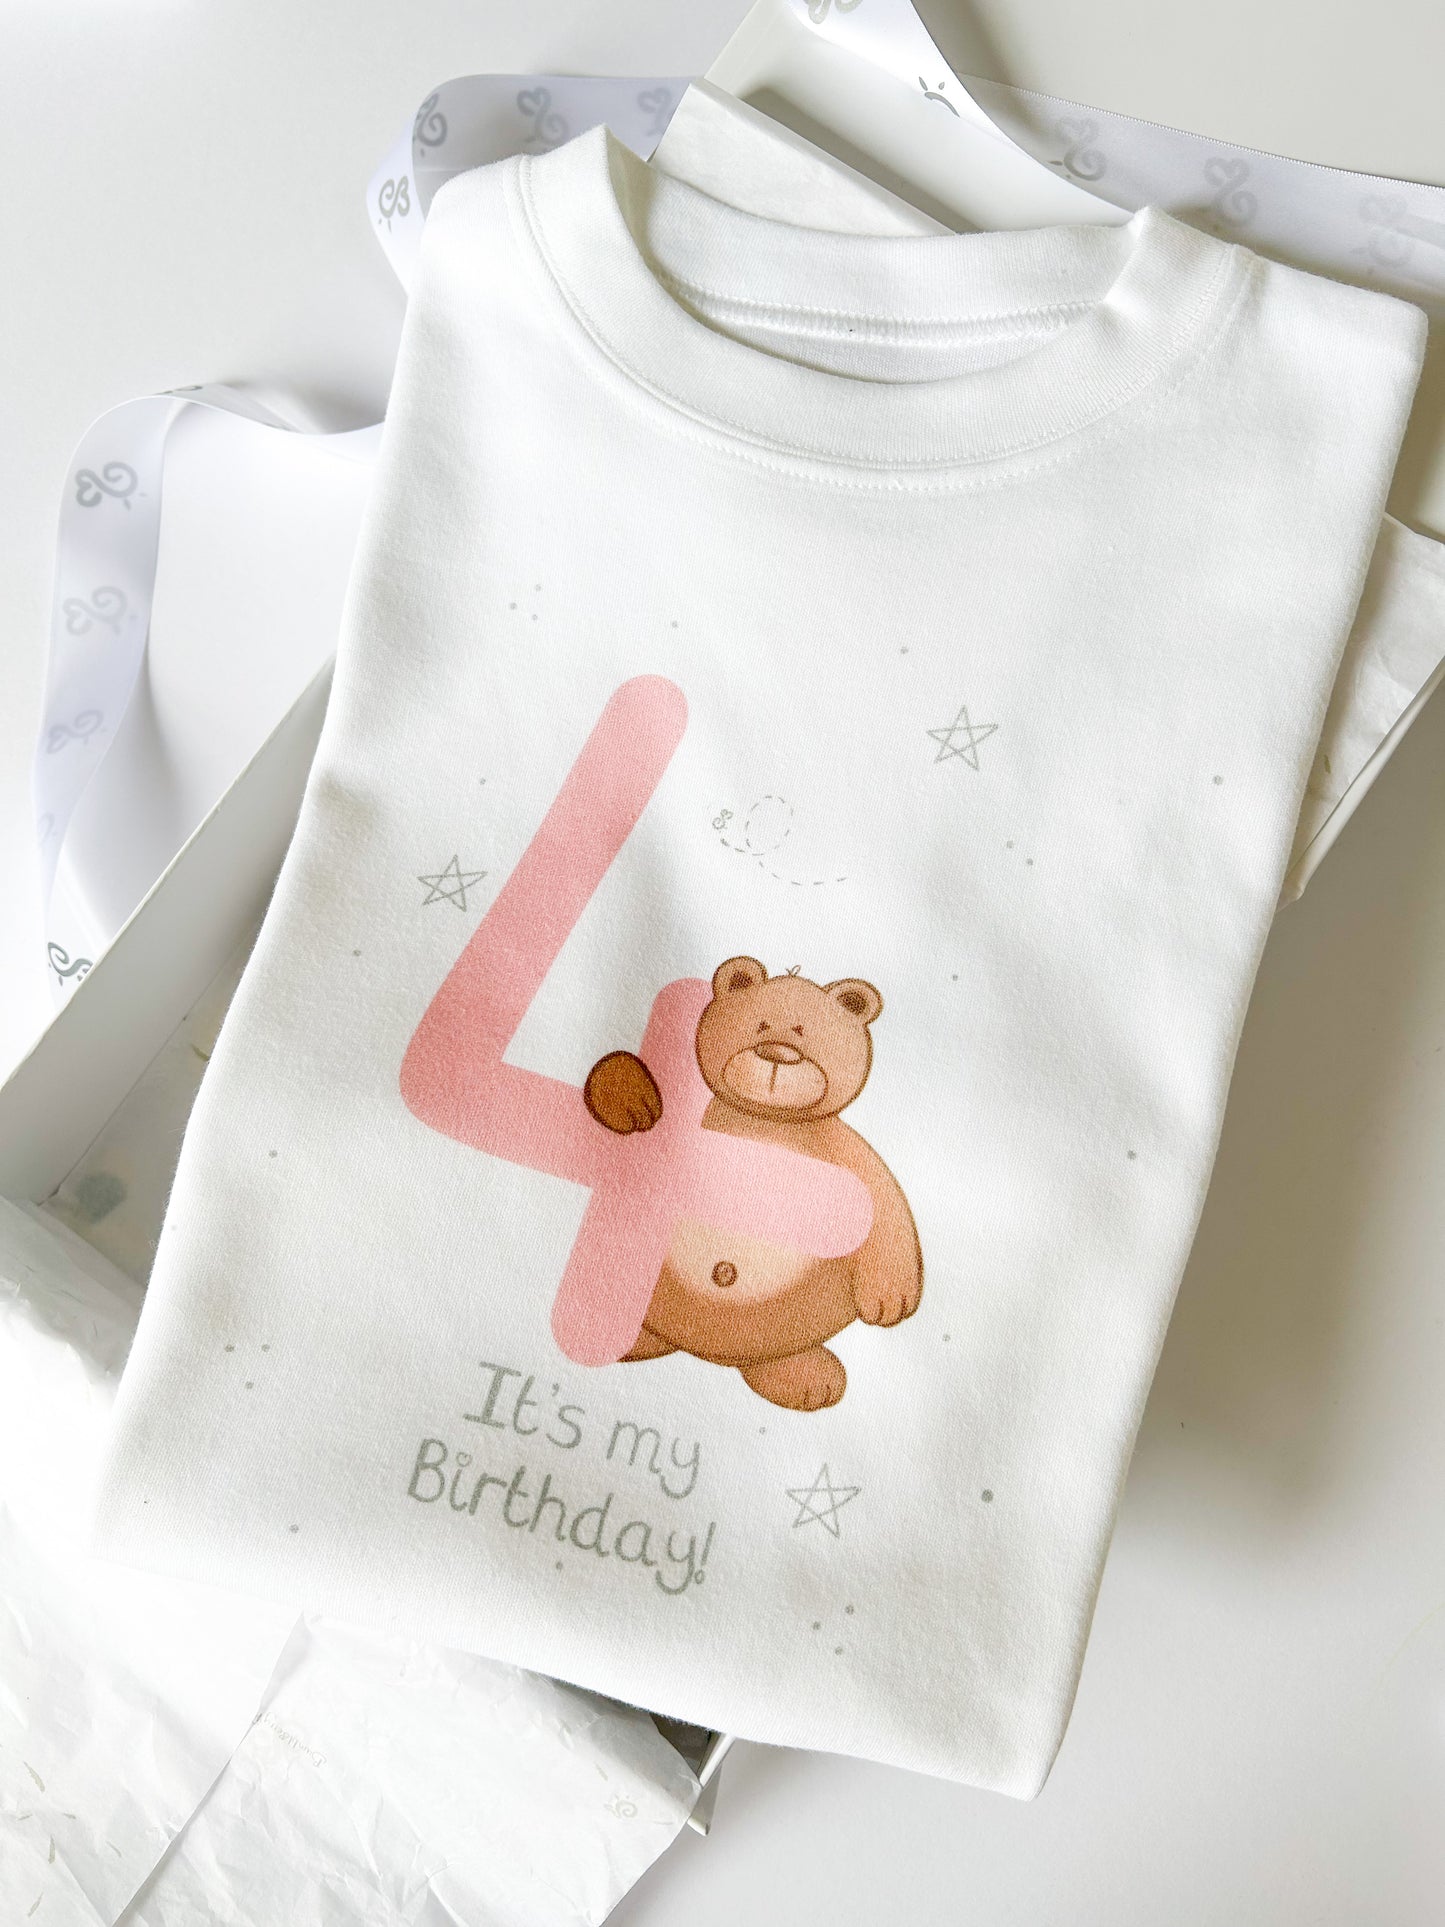 4th birthday t-shirt personalised with birthday message and woodland bear design in bright pink colour